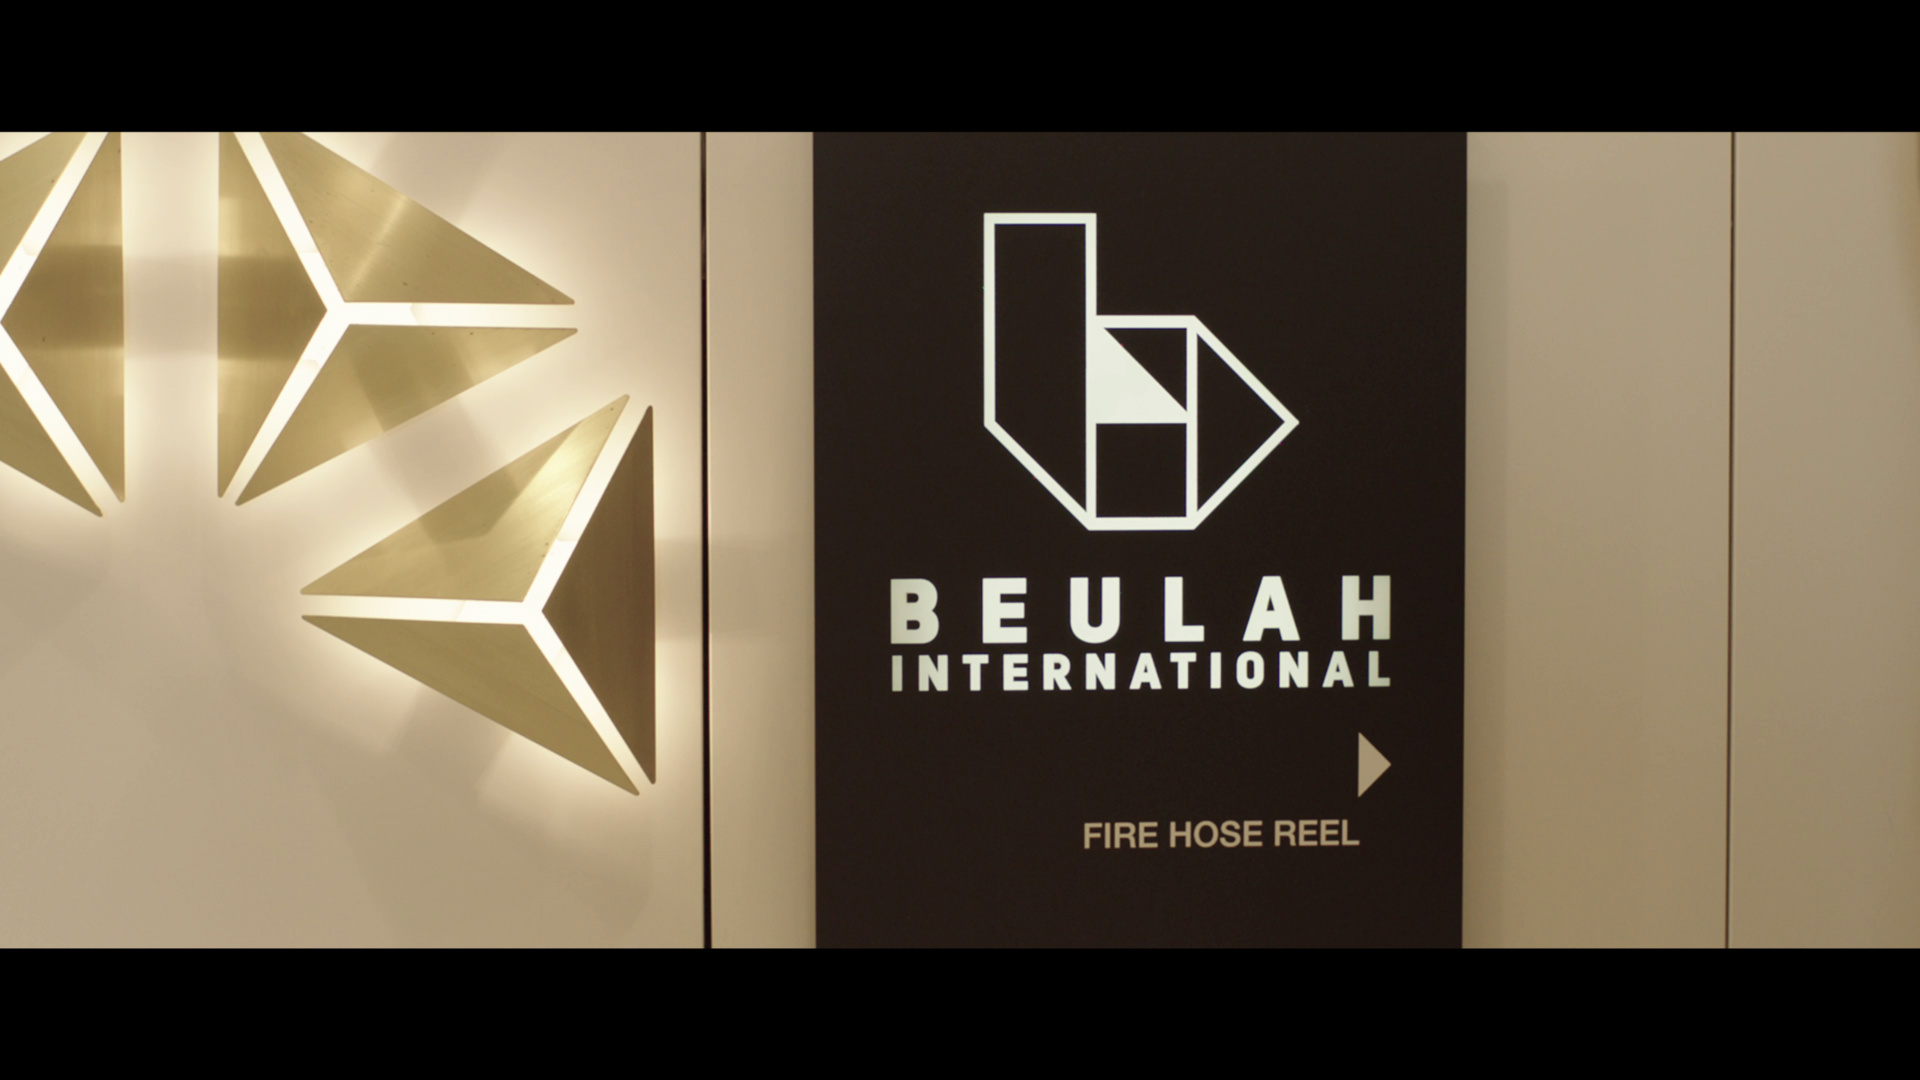 Beulah International | We Are Beulah | Real Estate Video Production